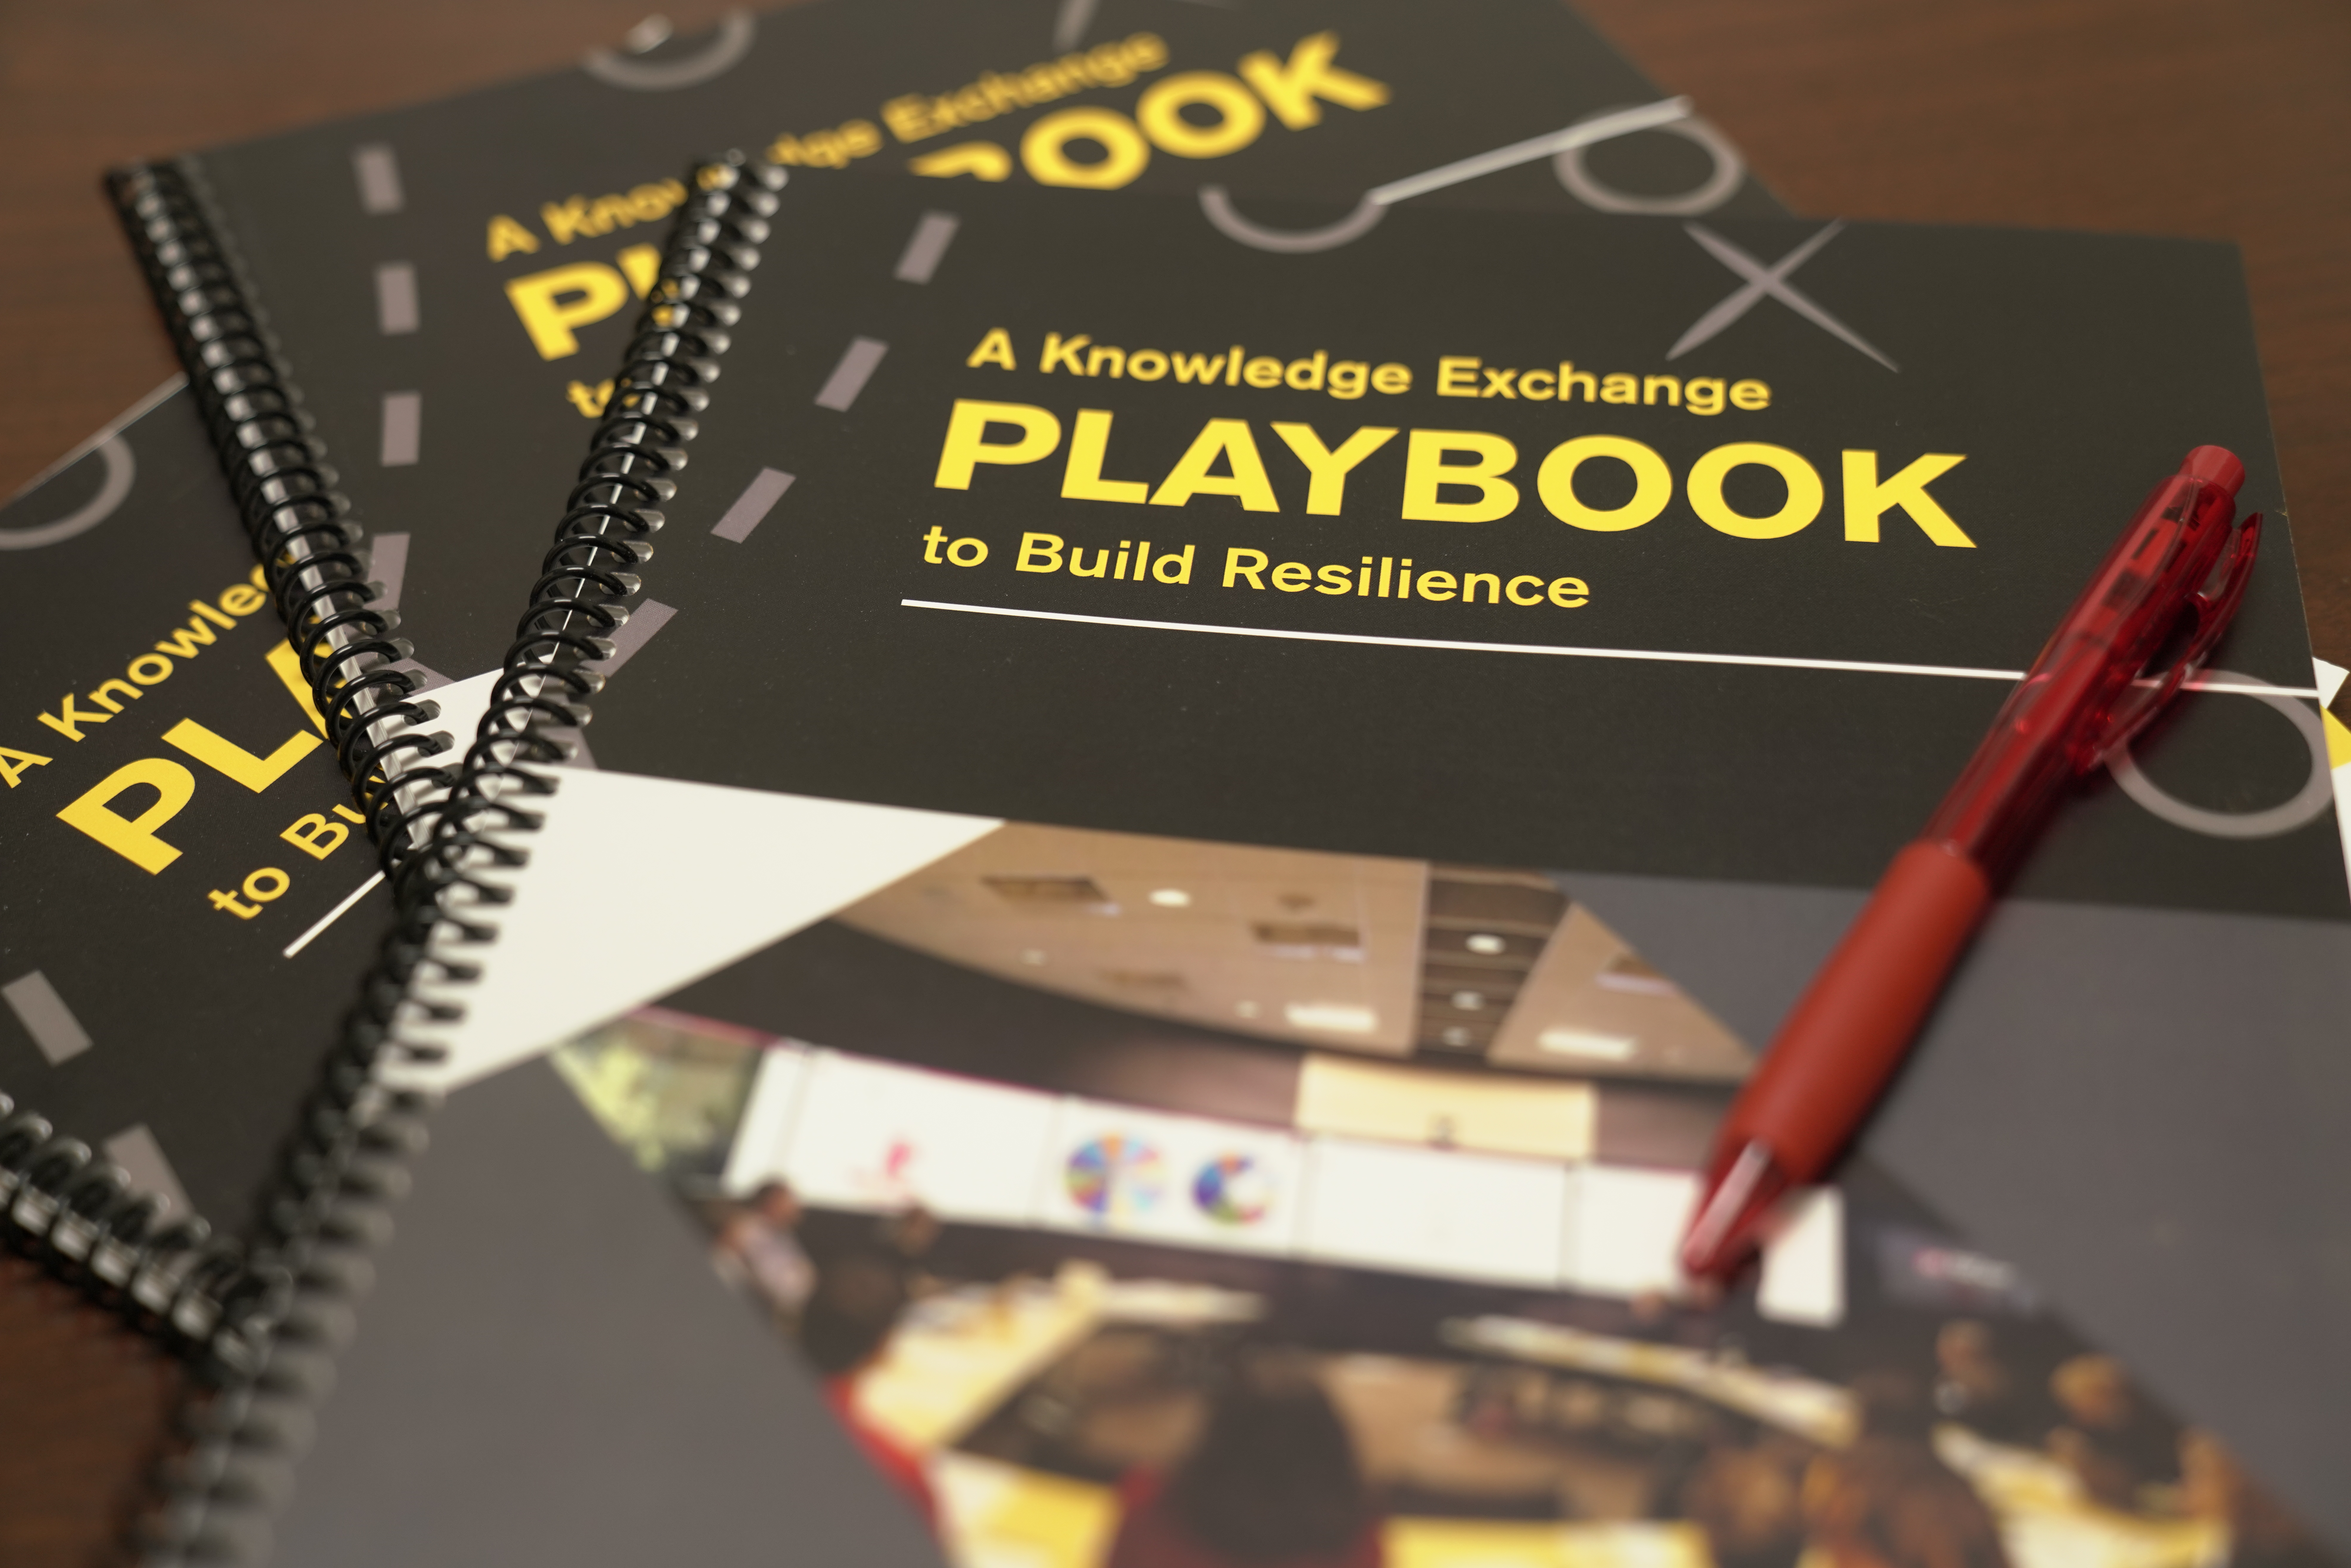 Contribute to the Playbook